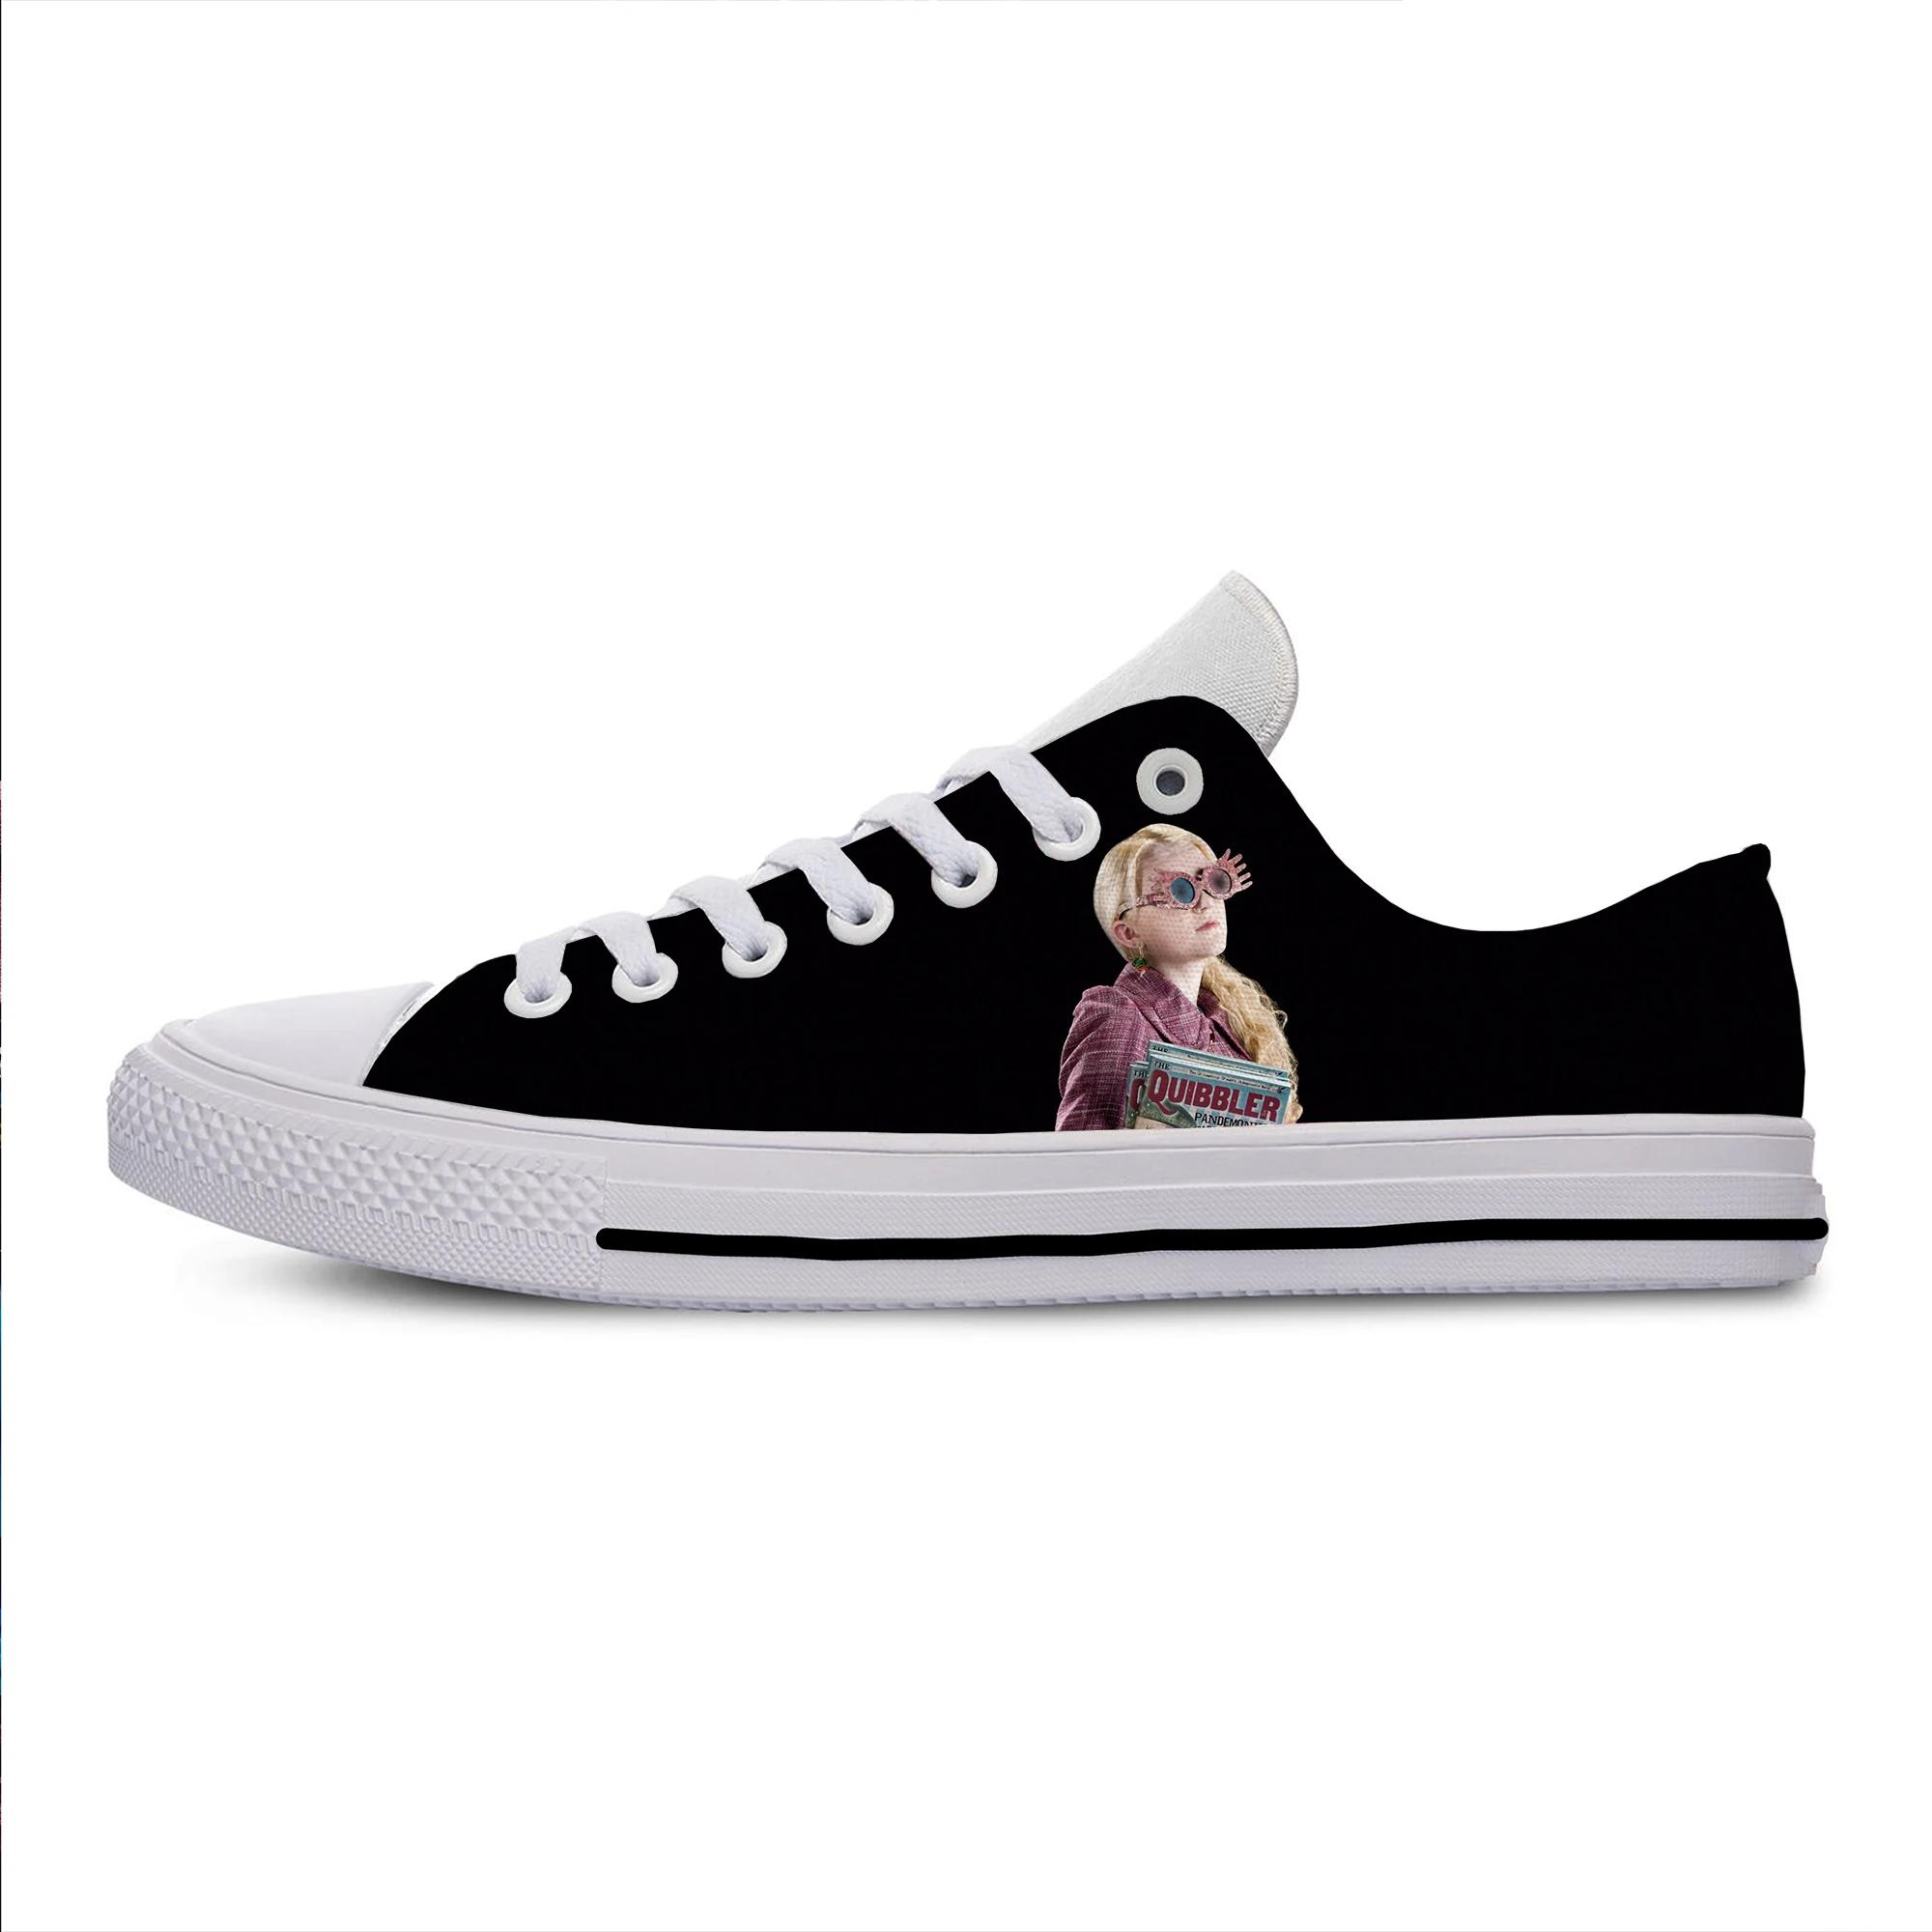 Hot Cool Funny New Summer High Quality Sneakers Handiness Casual Shoes Men Women Evanna Lynch Breathable Low Top Boa